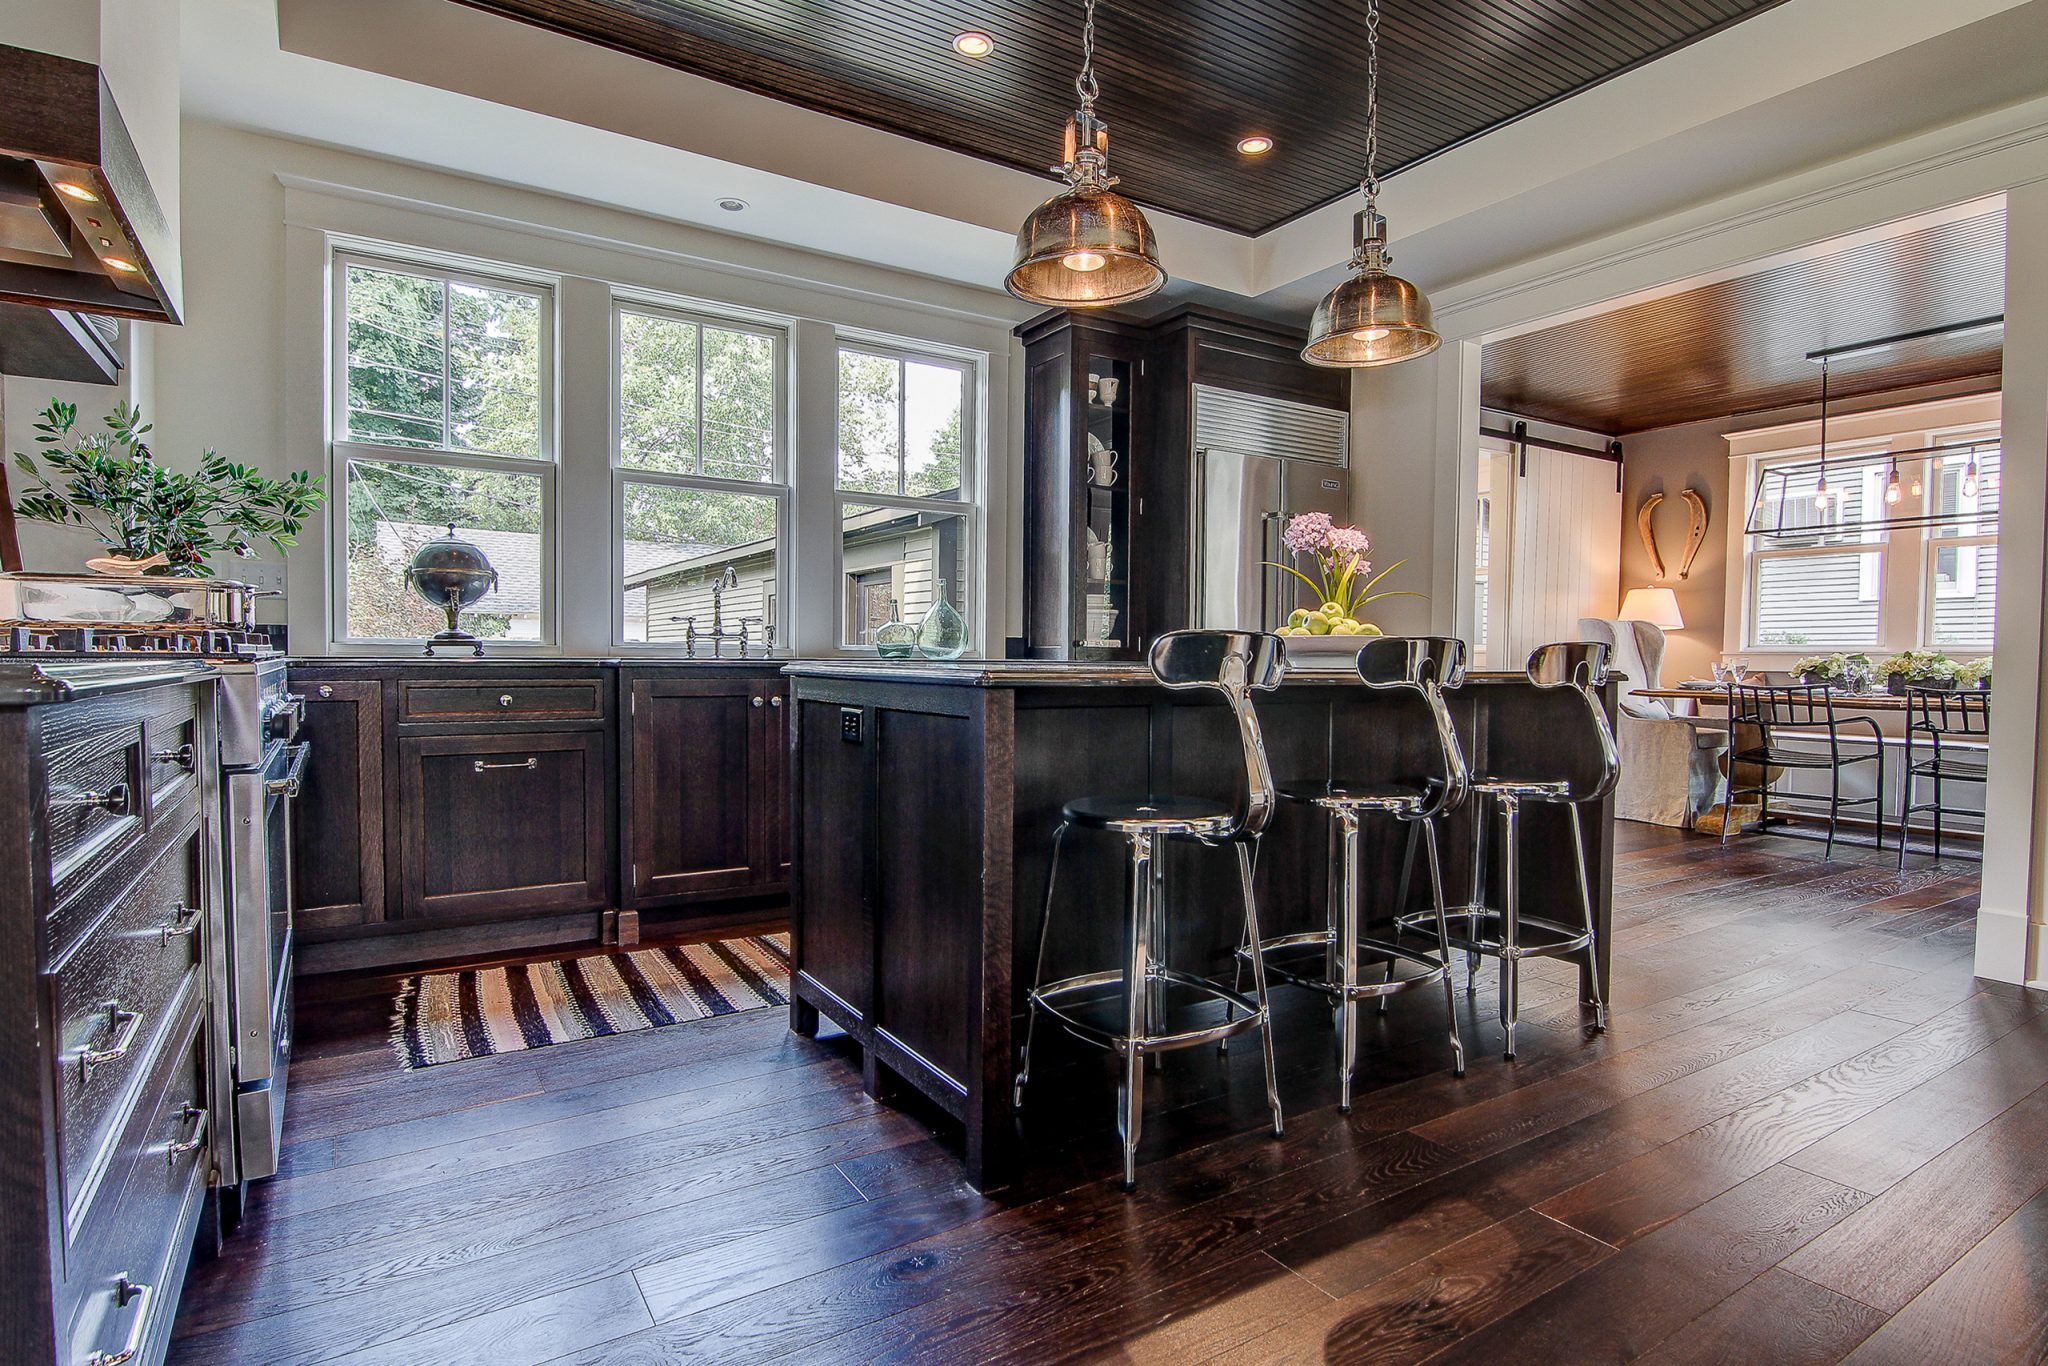 Kitchen with dark stained oak cabinets and island with three bar stools